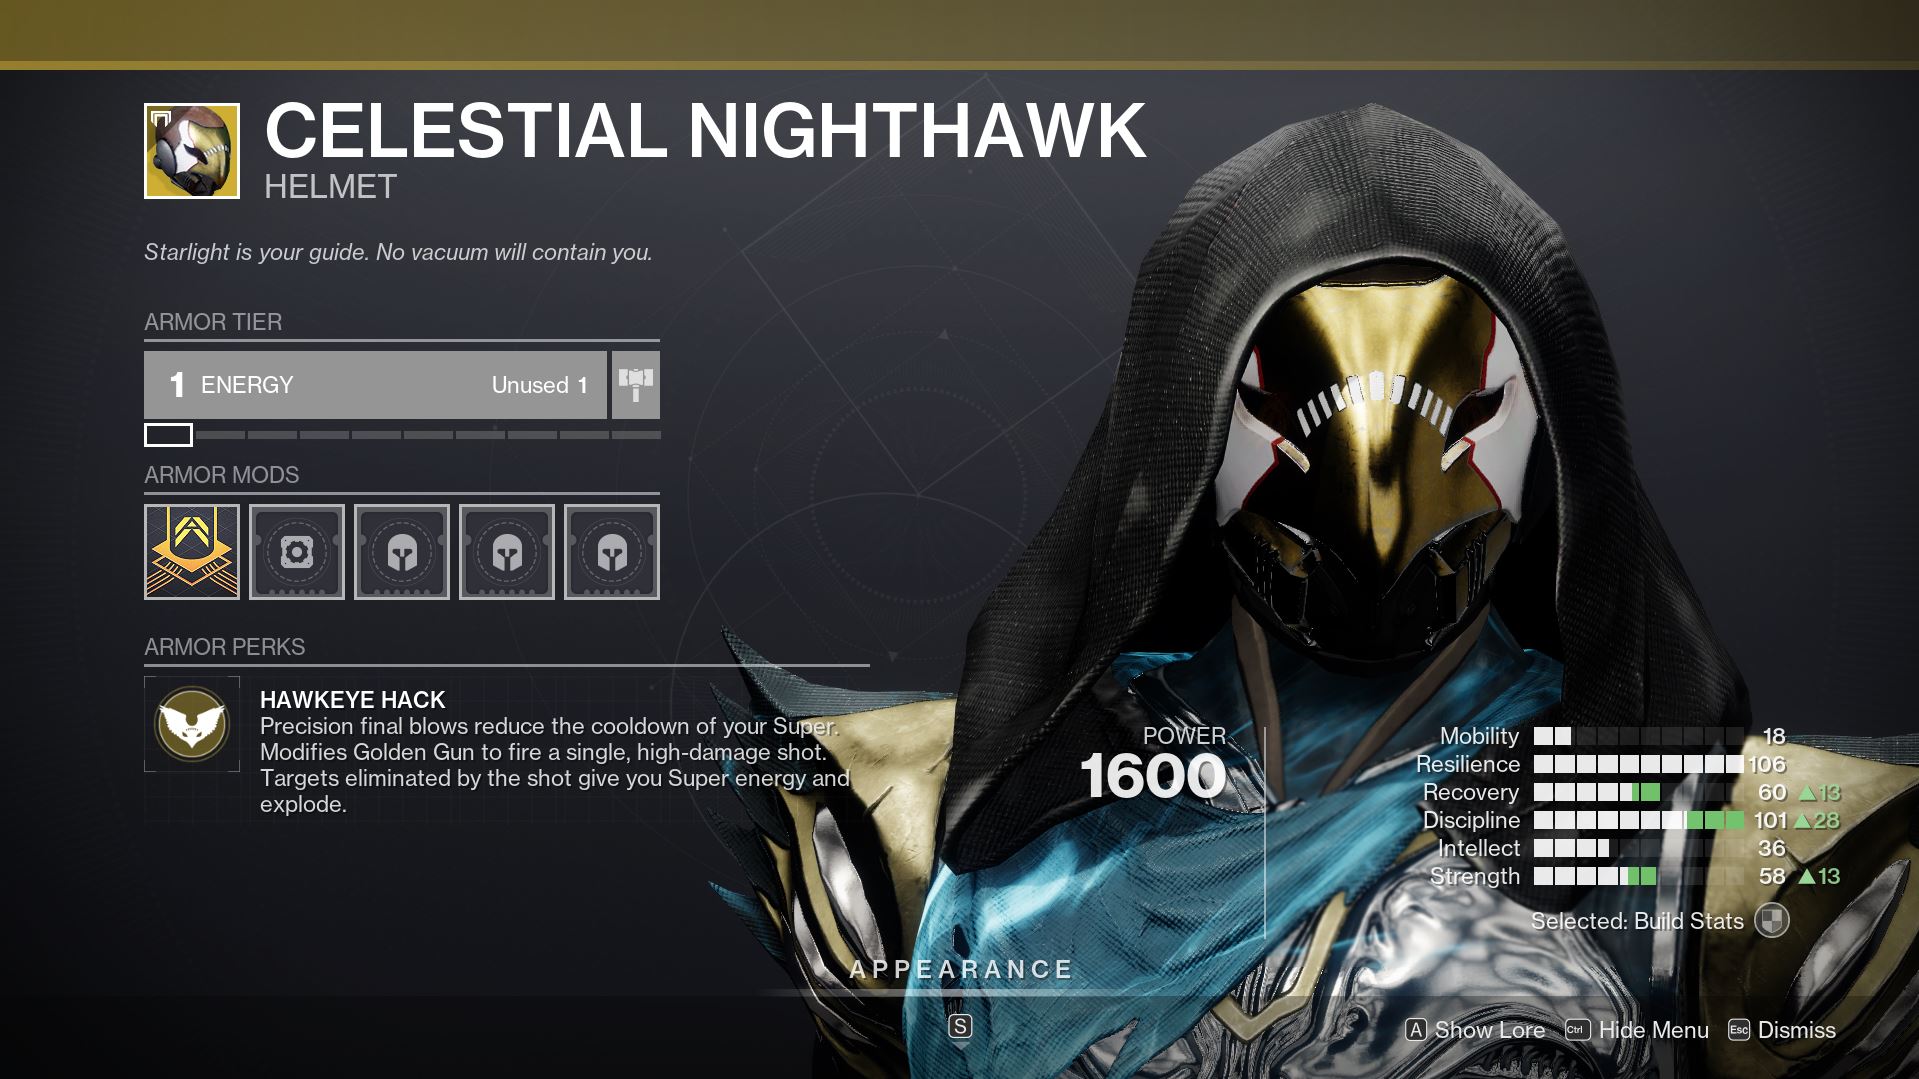 Destiny 2 Celestial Knighthawk Destiny 2 Has Seemingly Leaked New Exotic Armor Changes In-Game